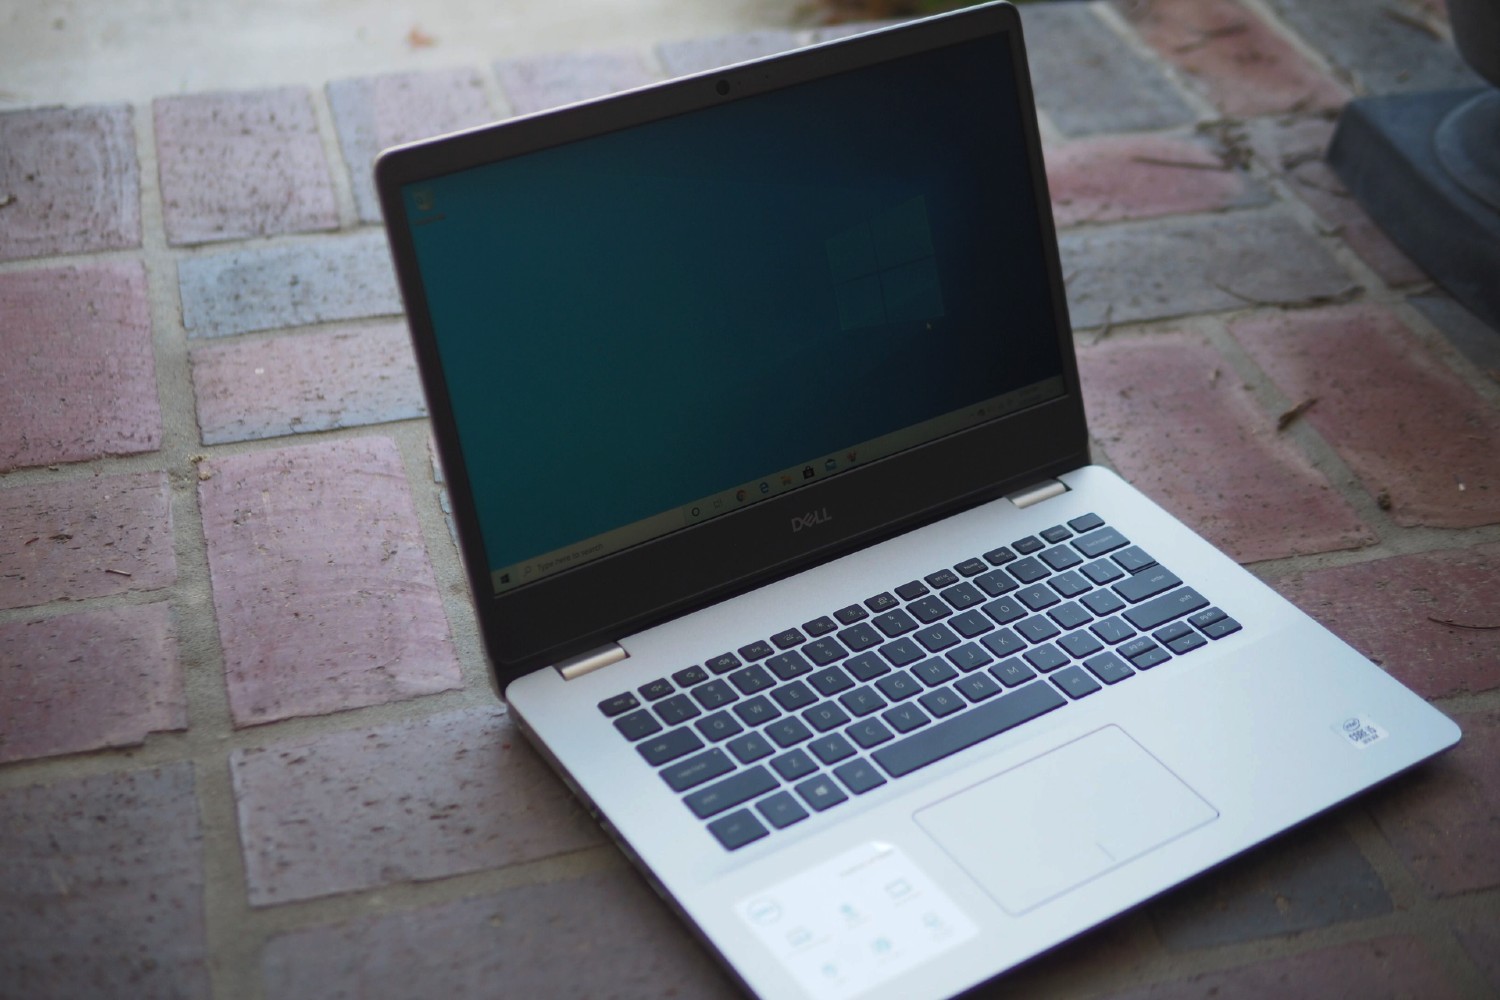 Dell Inspiron 14 5000 Review: Too Cheap to Be Good? | Digital Trends